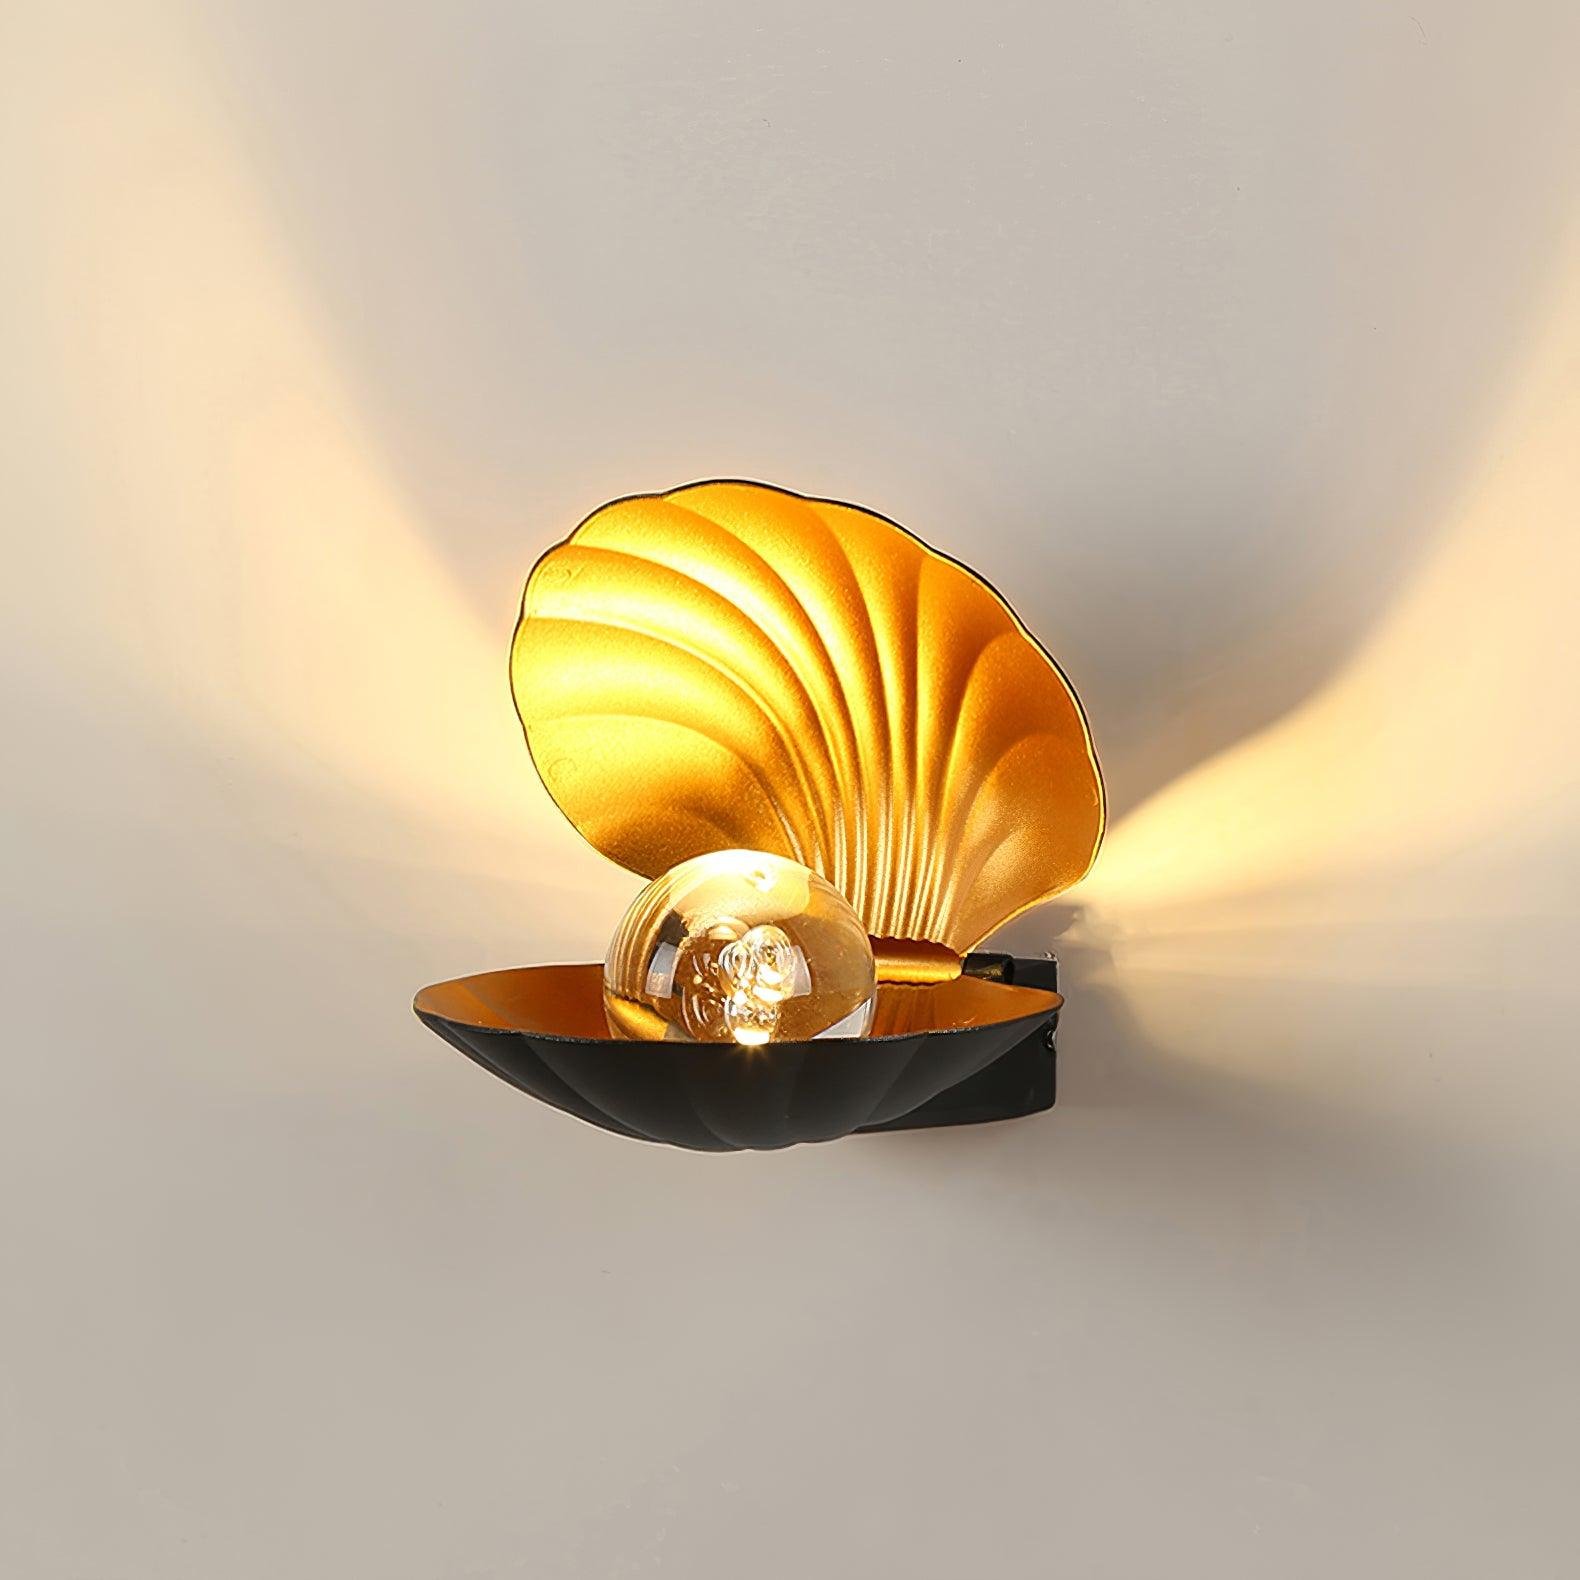 Set of 2 Black Pearl Clam Wall Lights with Cool Light Glow